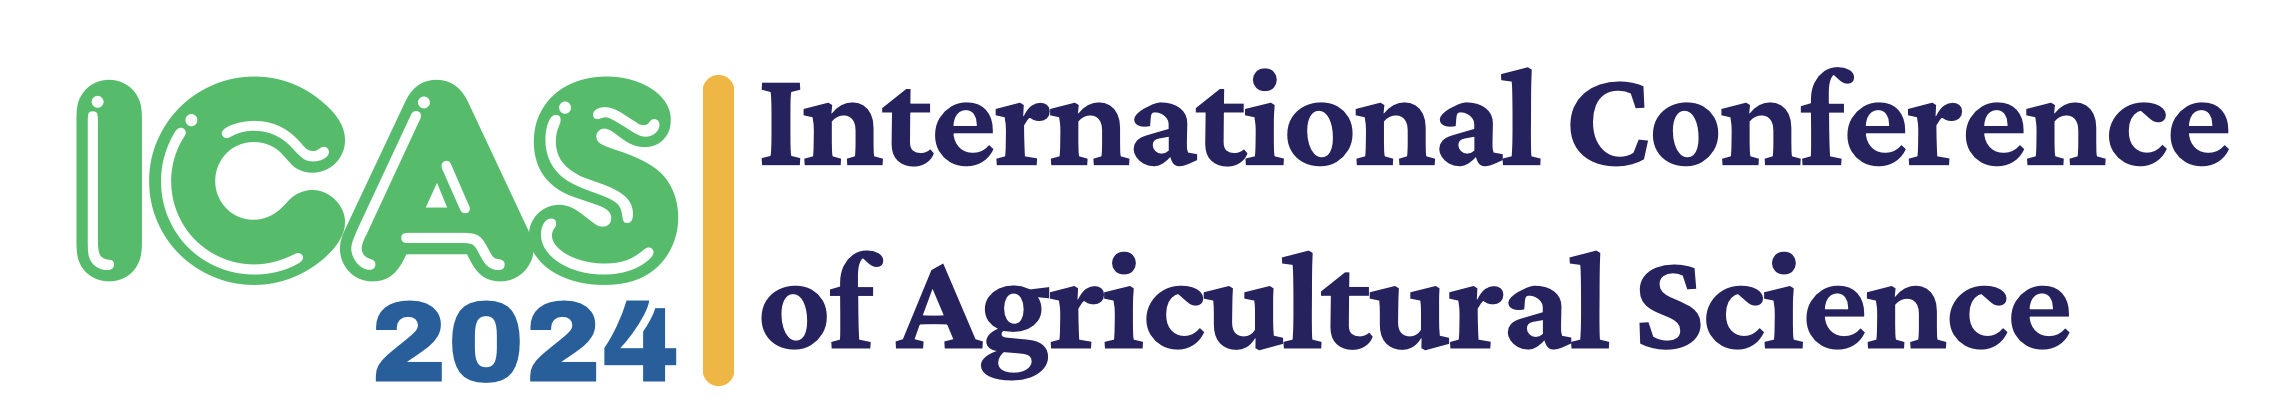 ICAS - The International Conference of the Agricultural Science